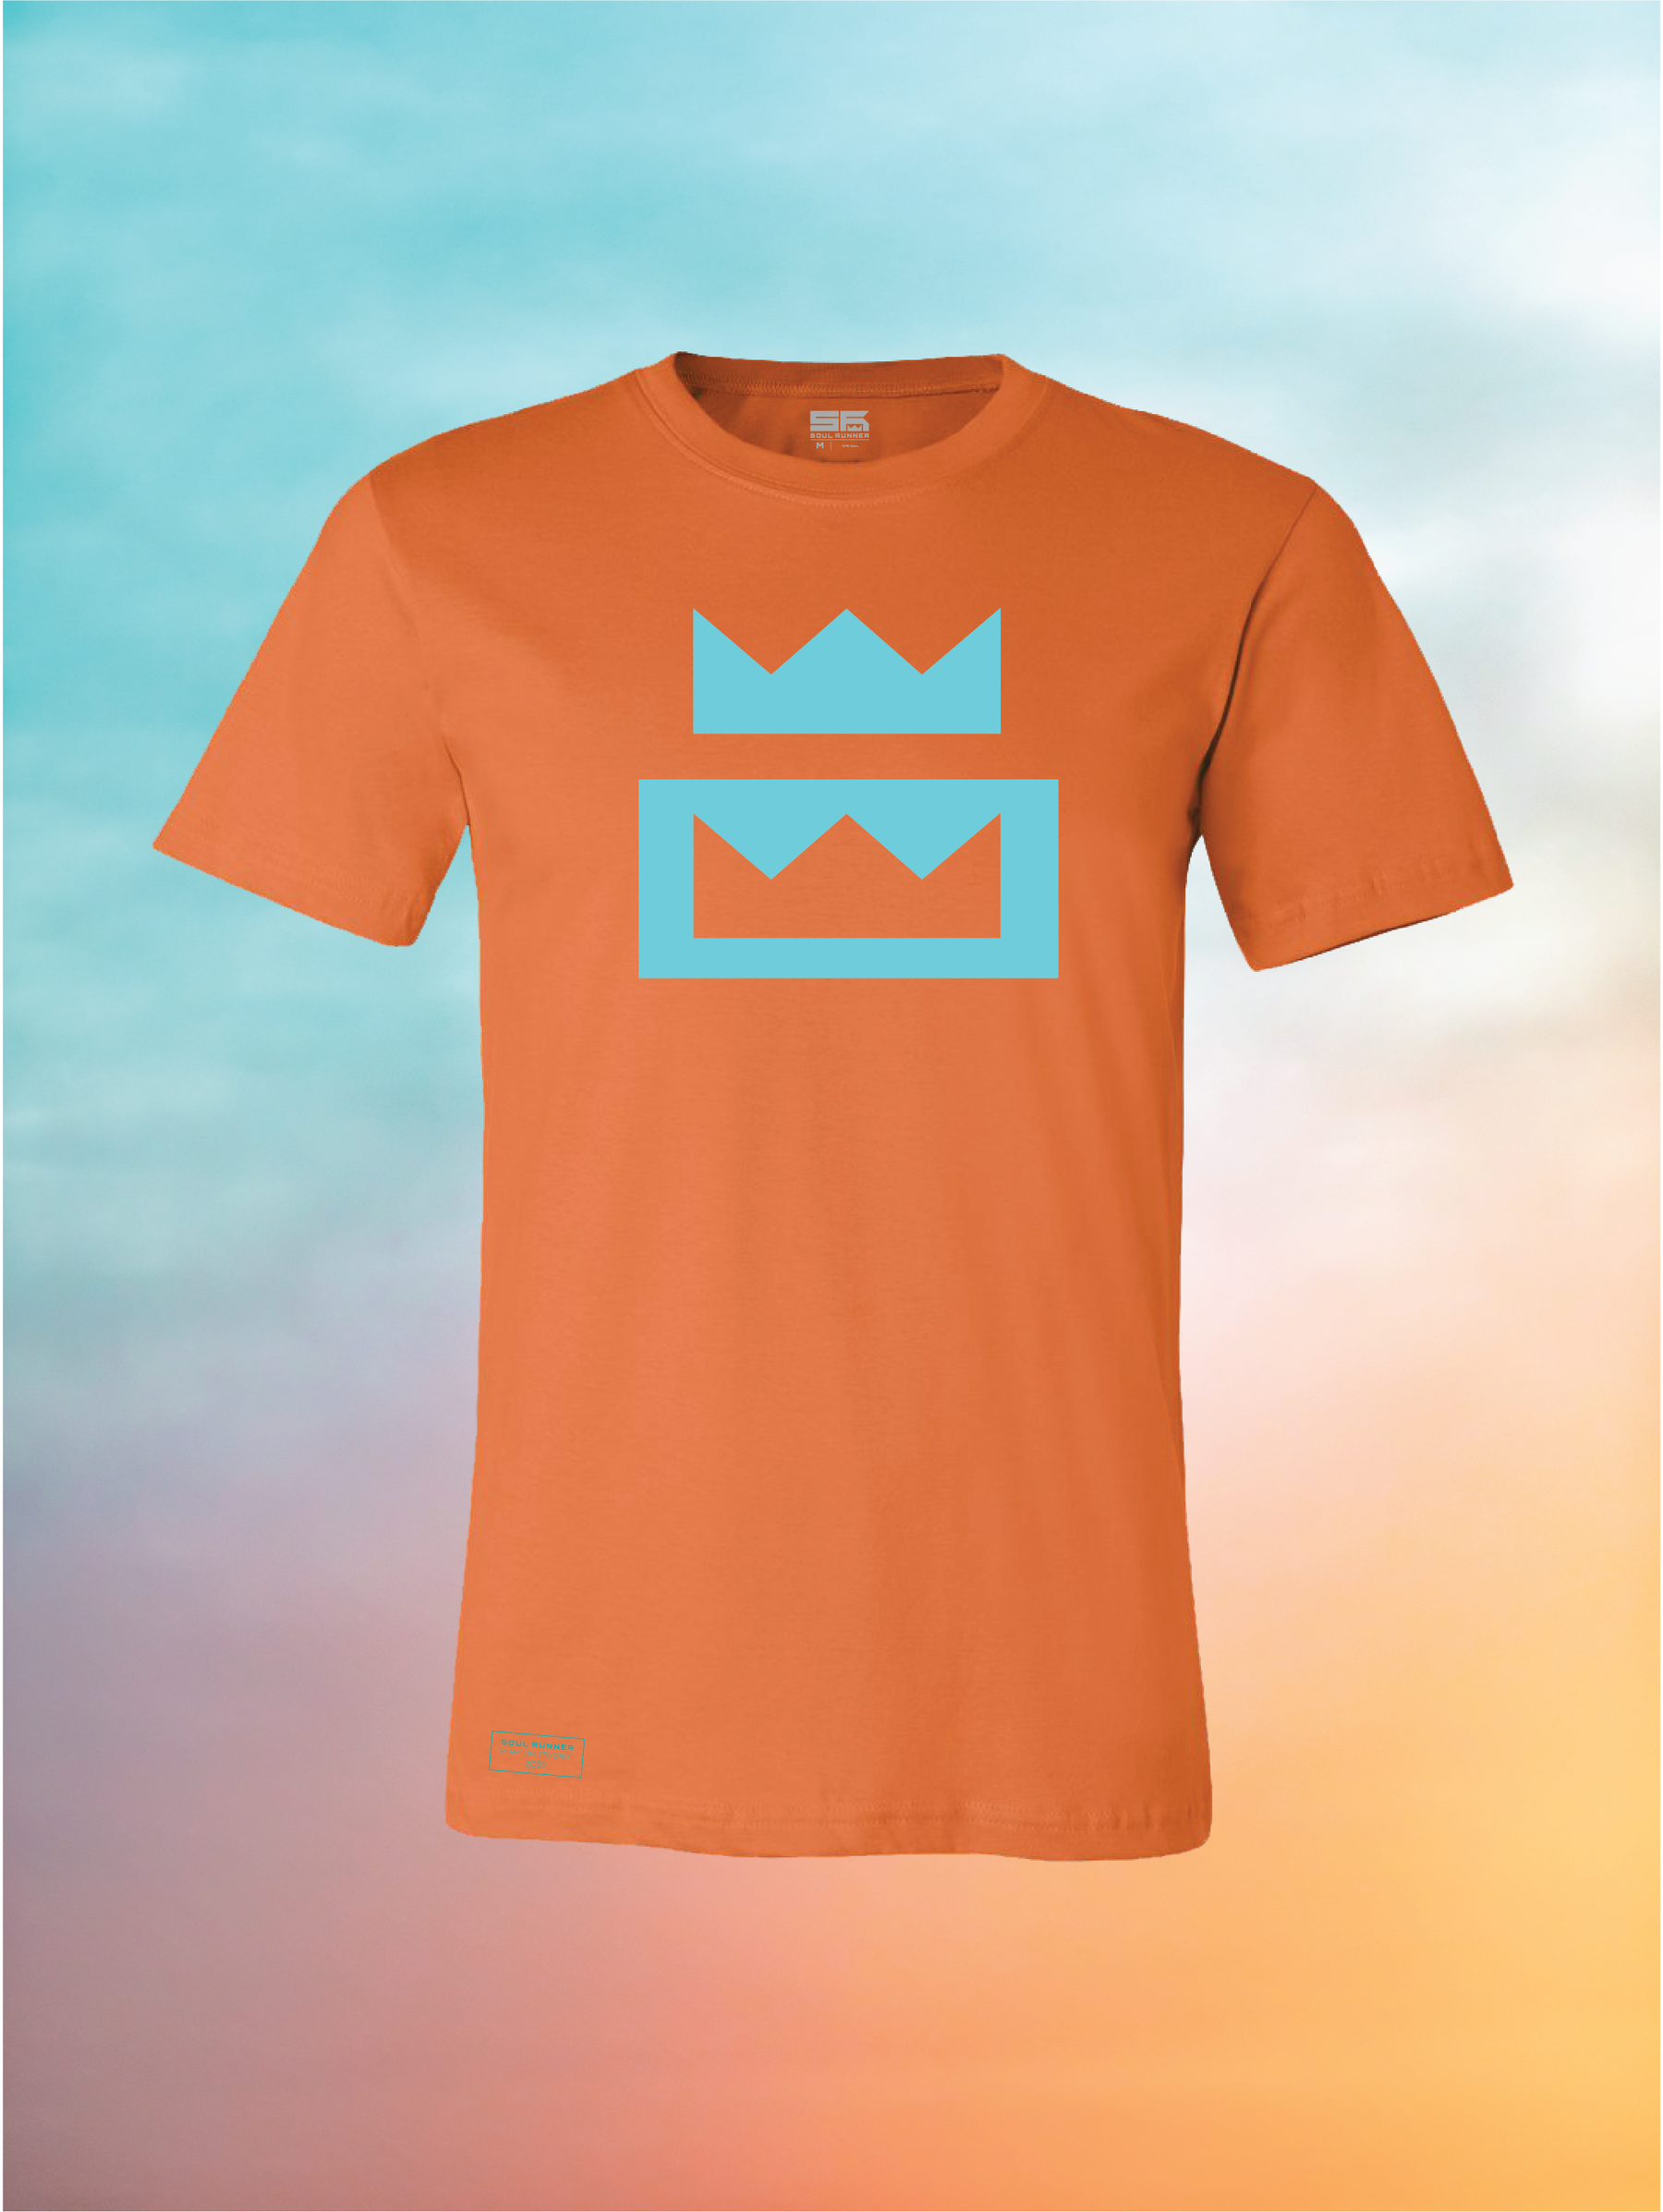 Miami Crown Tee [Limited Release]